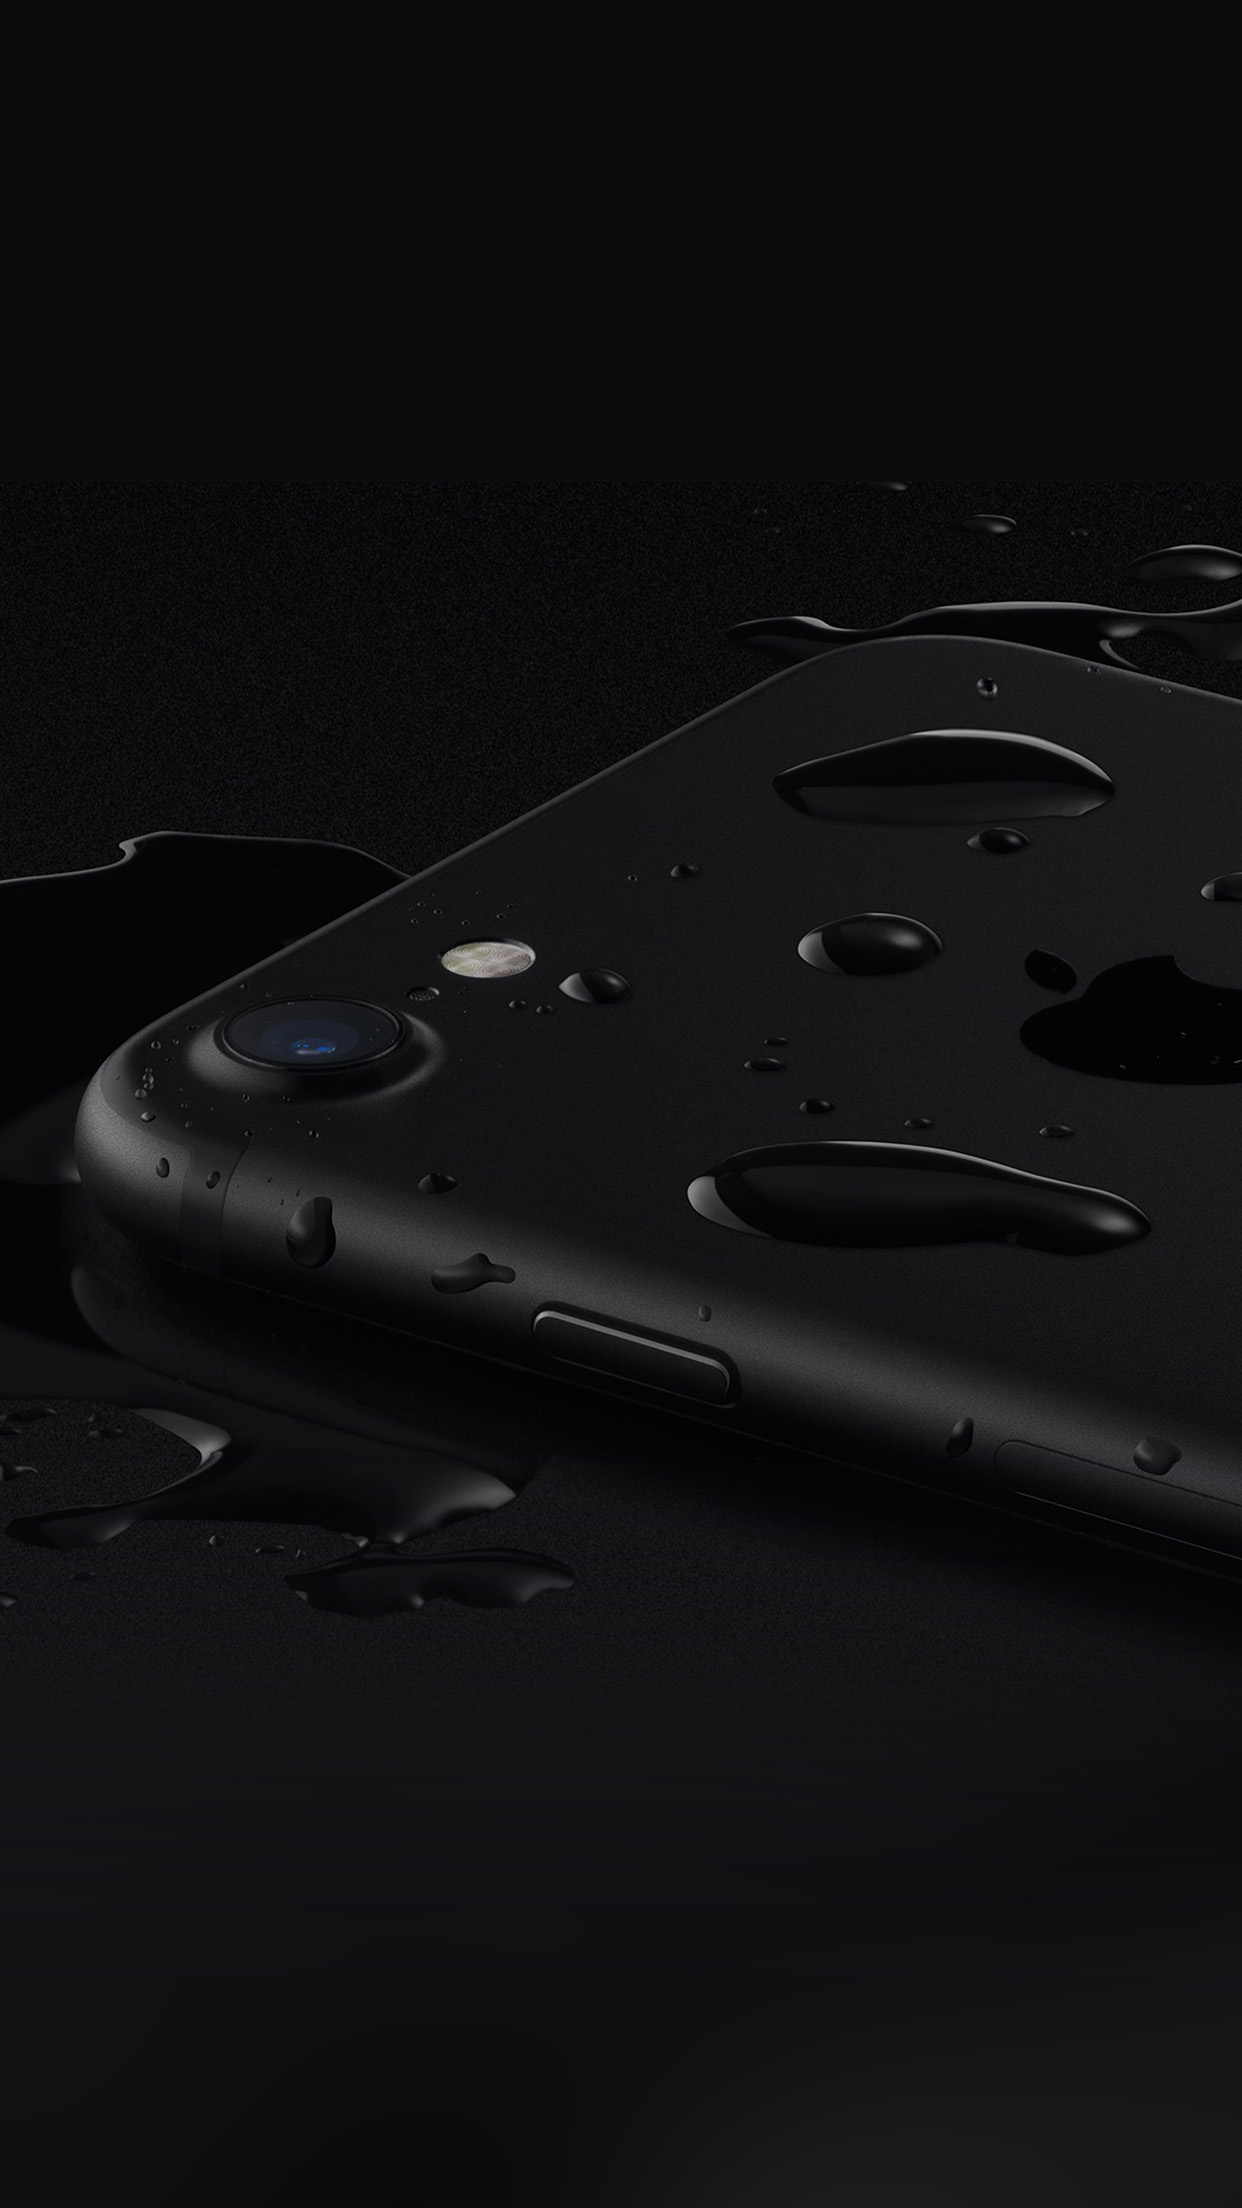 Iphone7 Black Water Resistant Apple Art Illustration Android wallpaper